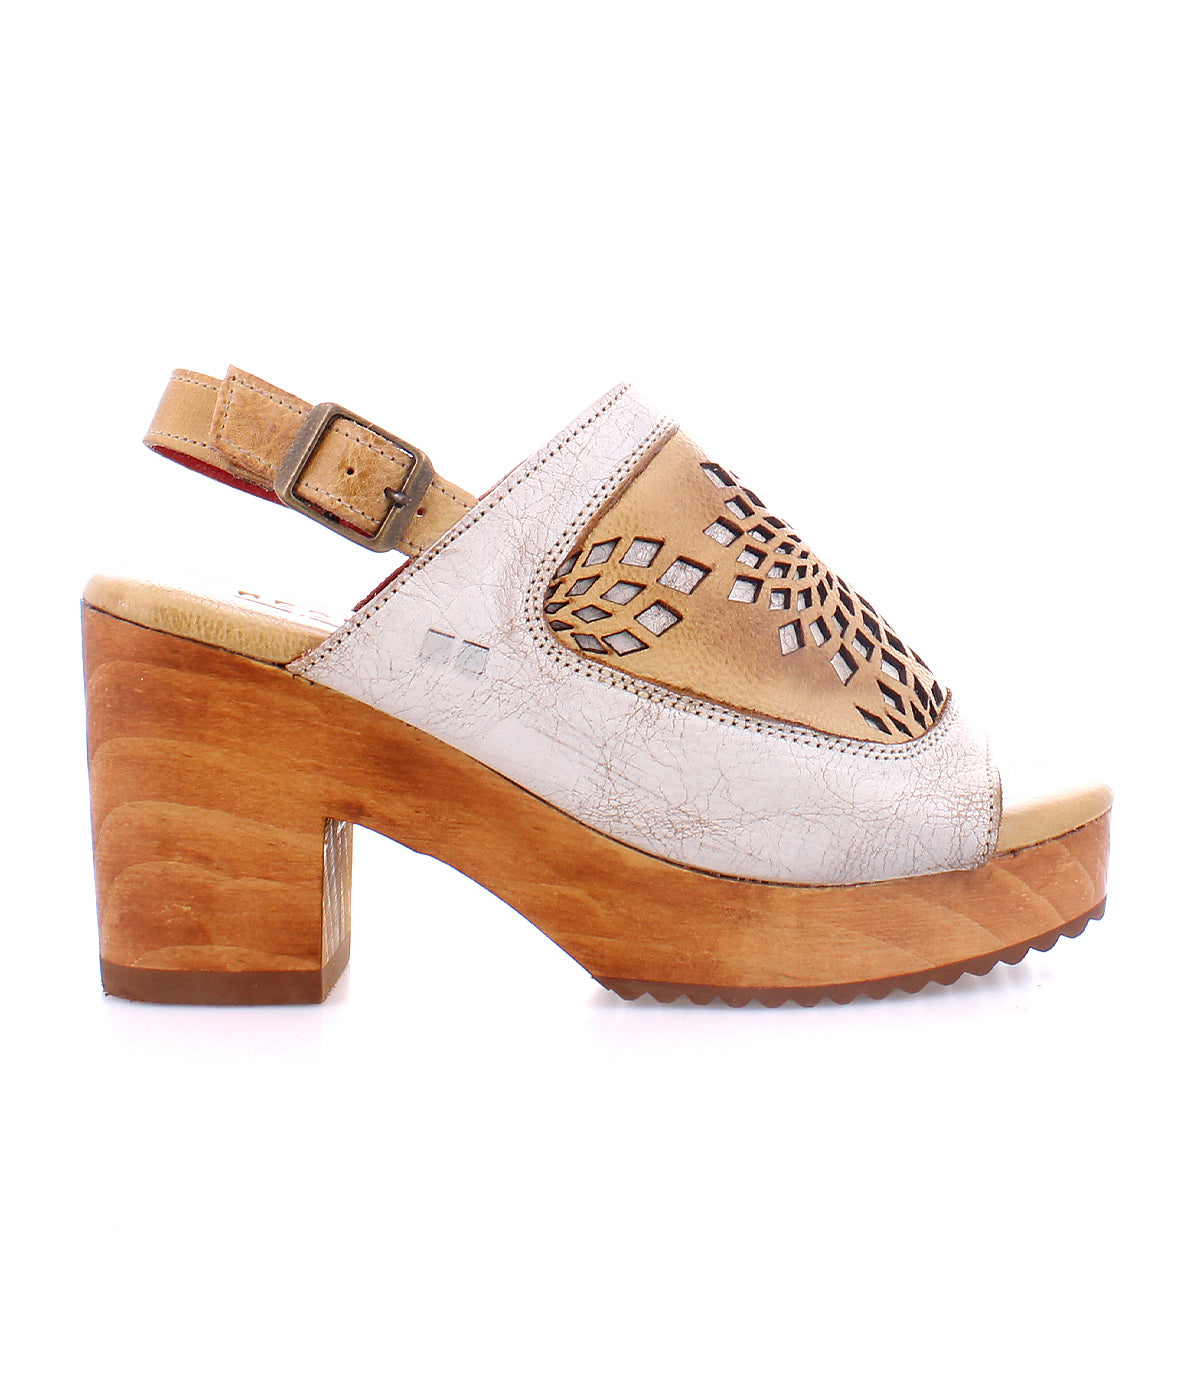 An adjustable ankle buckle sandal with a wooden platform and a wooden heel called Jinkie by Bed Stu.